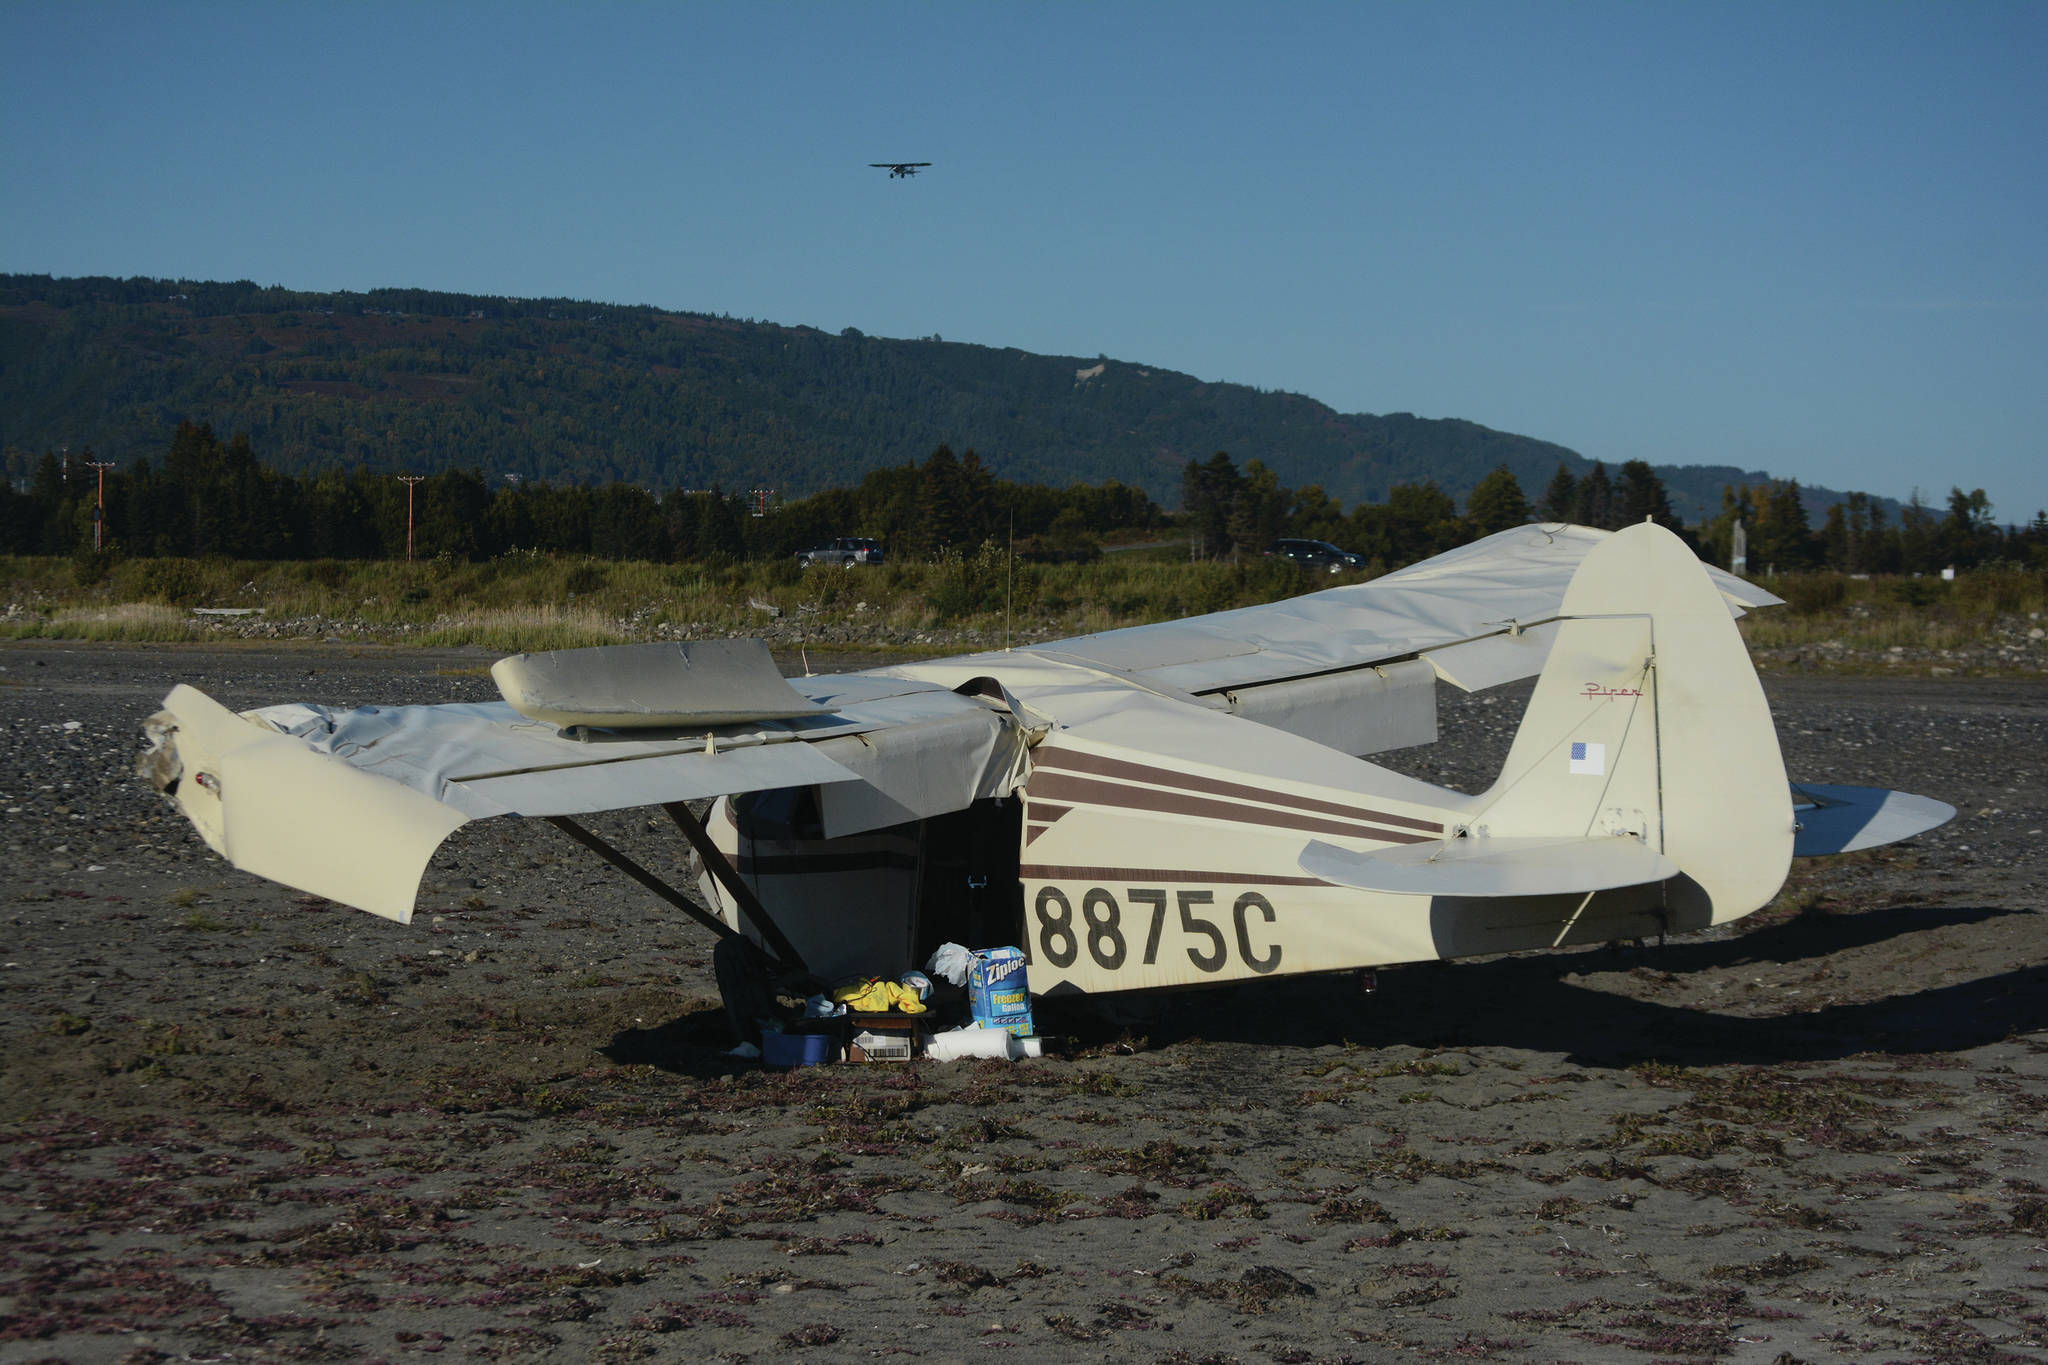 Two plane crashes occur over weekend